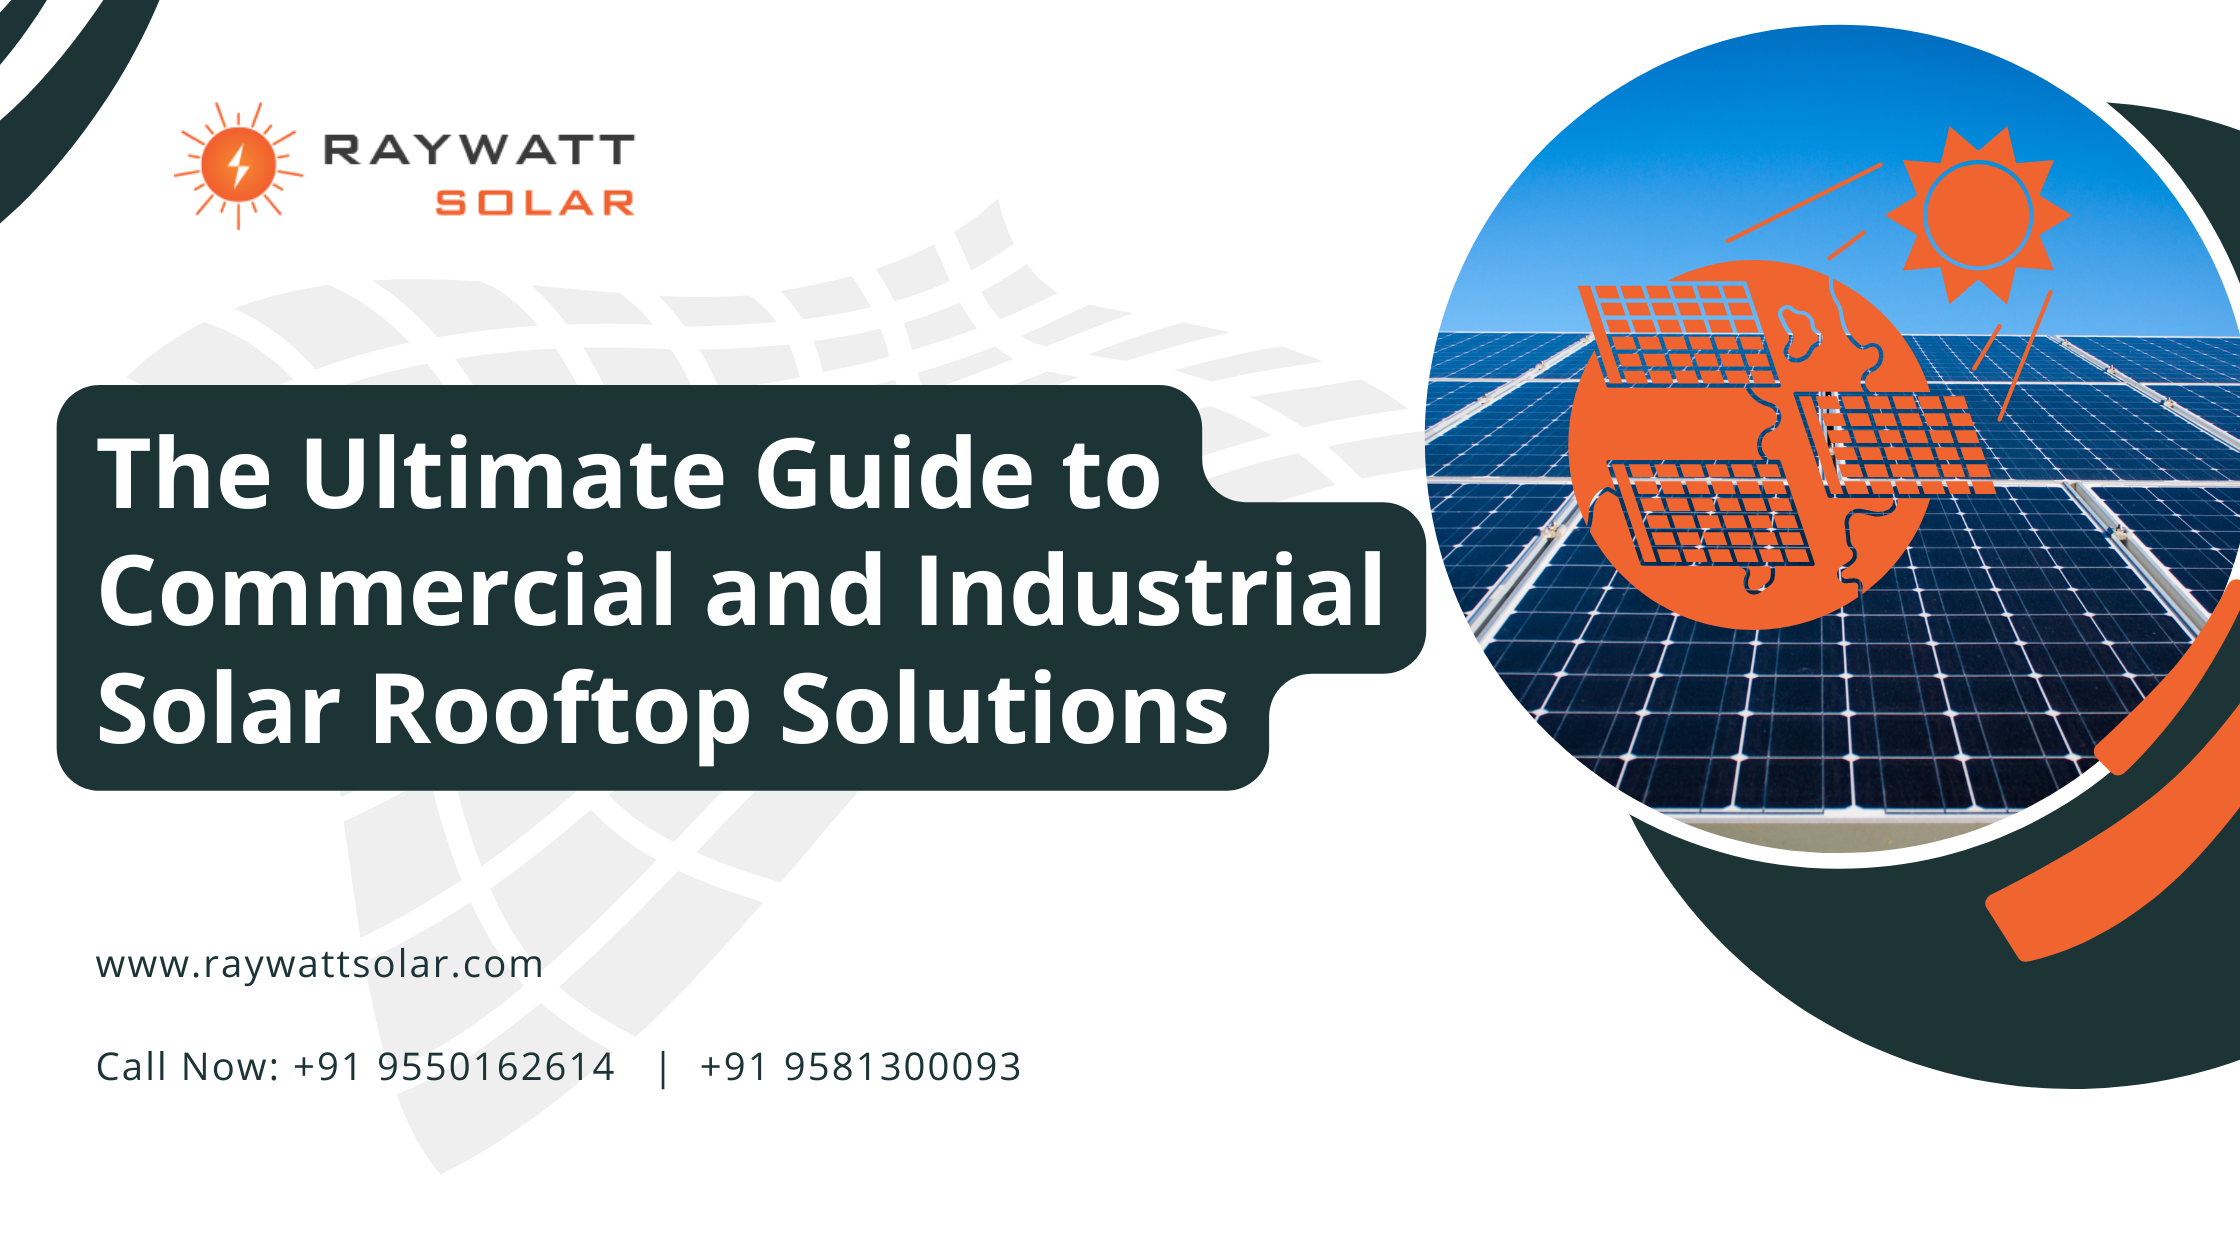 The Ultimate Guide to Commercial and Industrial Solar Rooftop Solutions